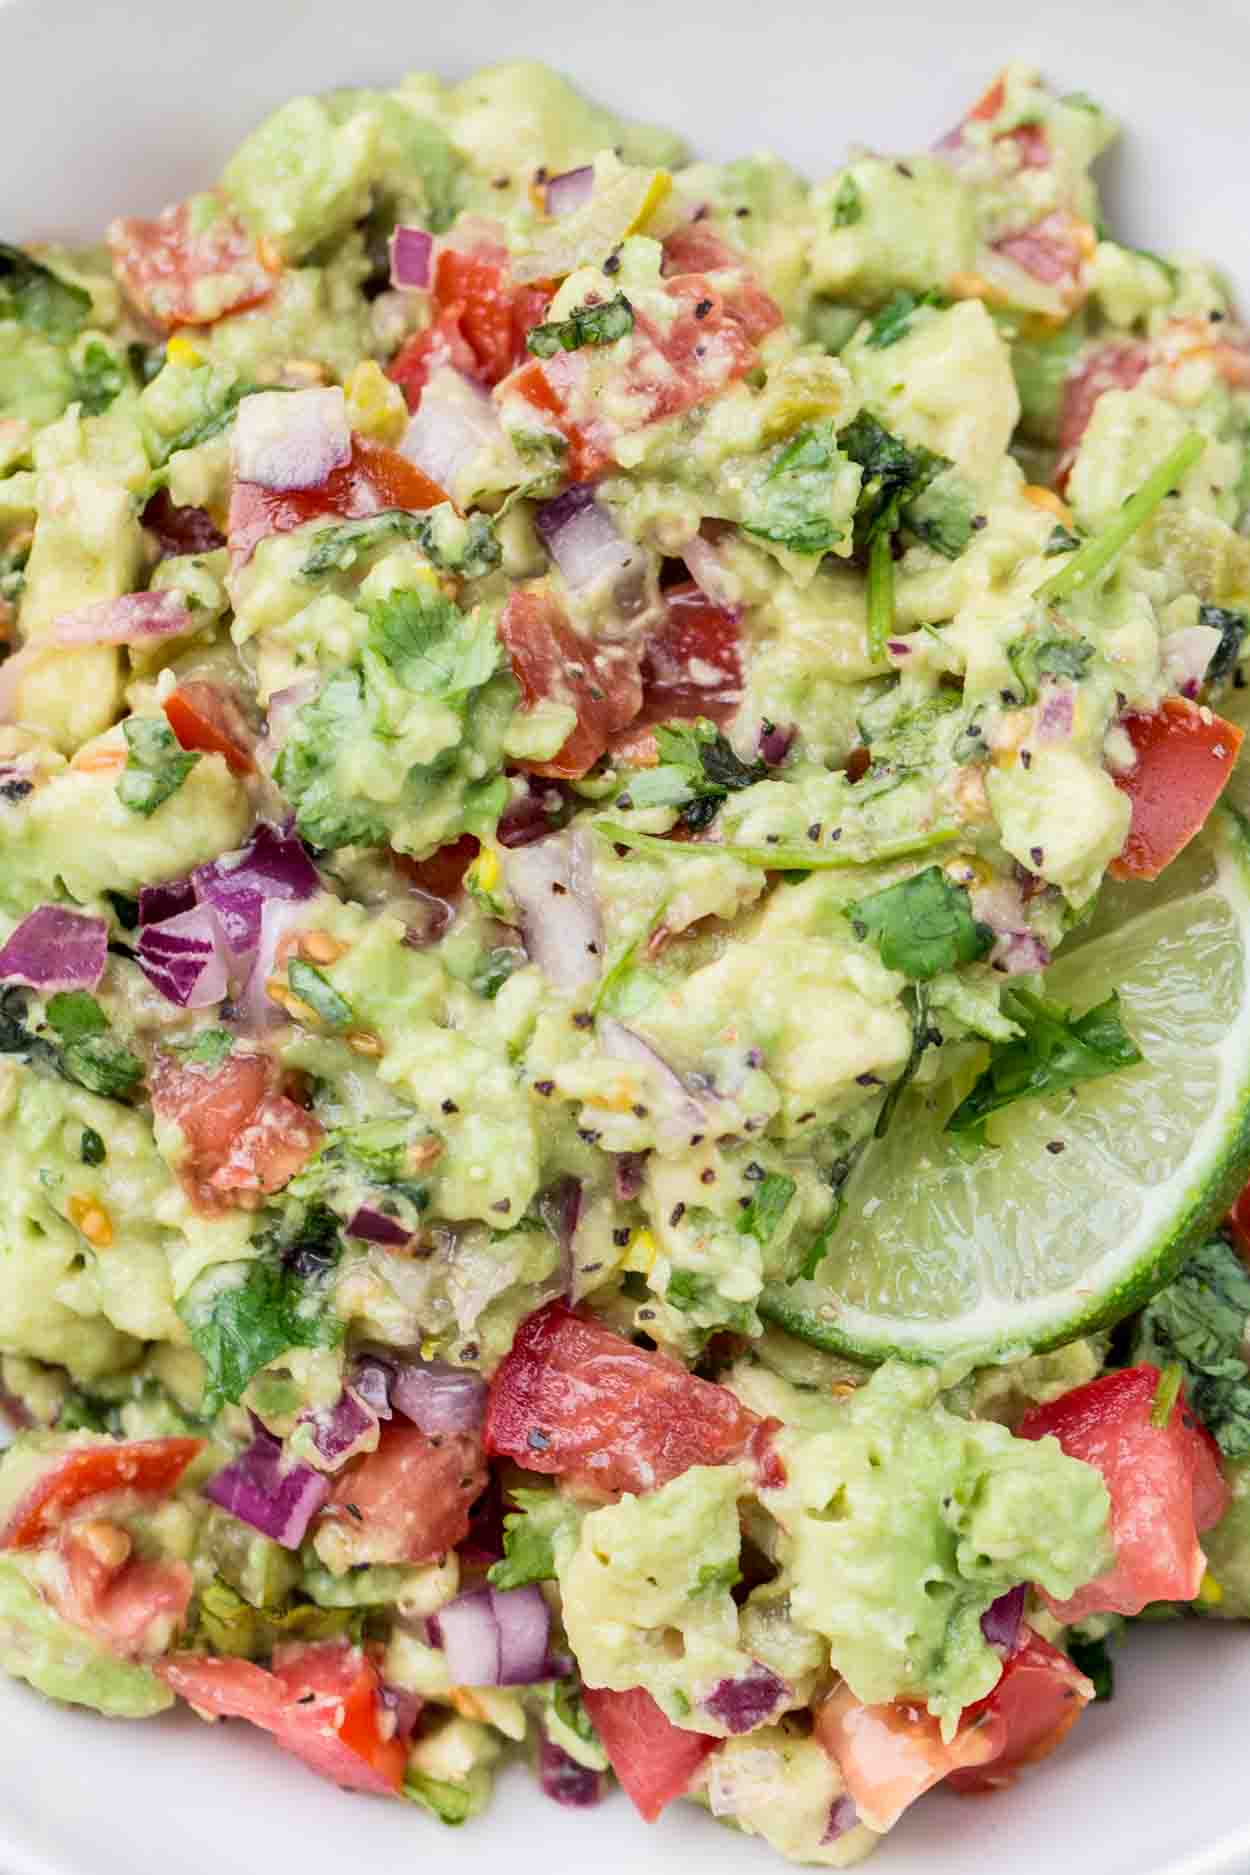 A recipe for the classic avocado dip. The best guacamole recipe made with cilantro and fresh tomatoes and lime juice. This dip is perfect for parties or potlucks and is so healthy.